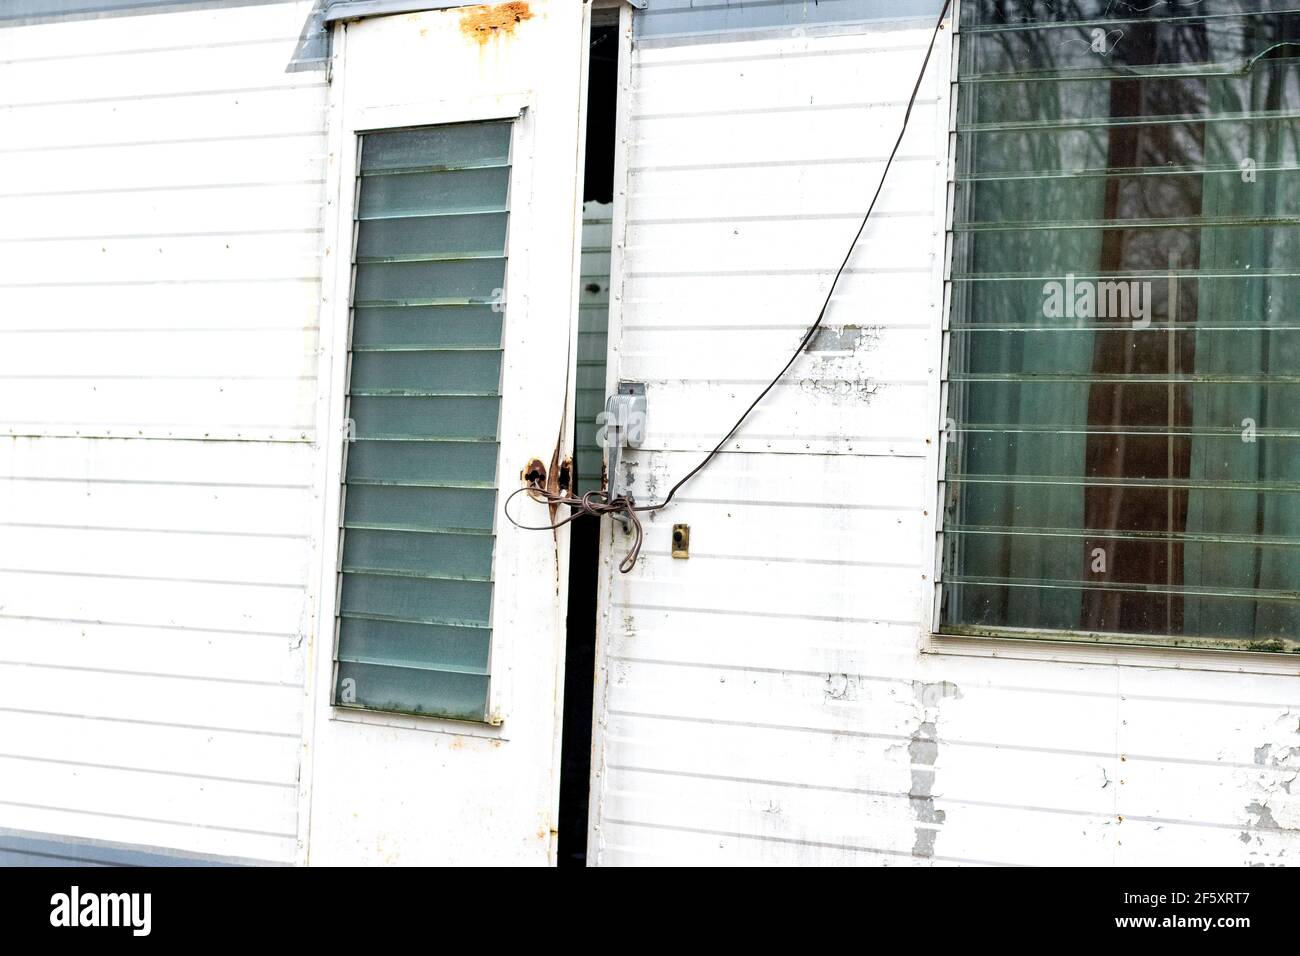 An old trailer door with glass crank windows is rigged shut with wire from the outside Stock Photo